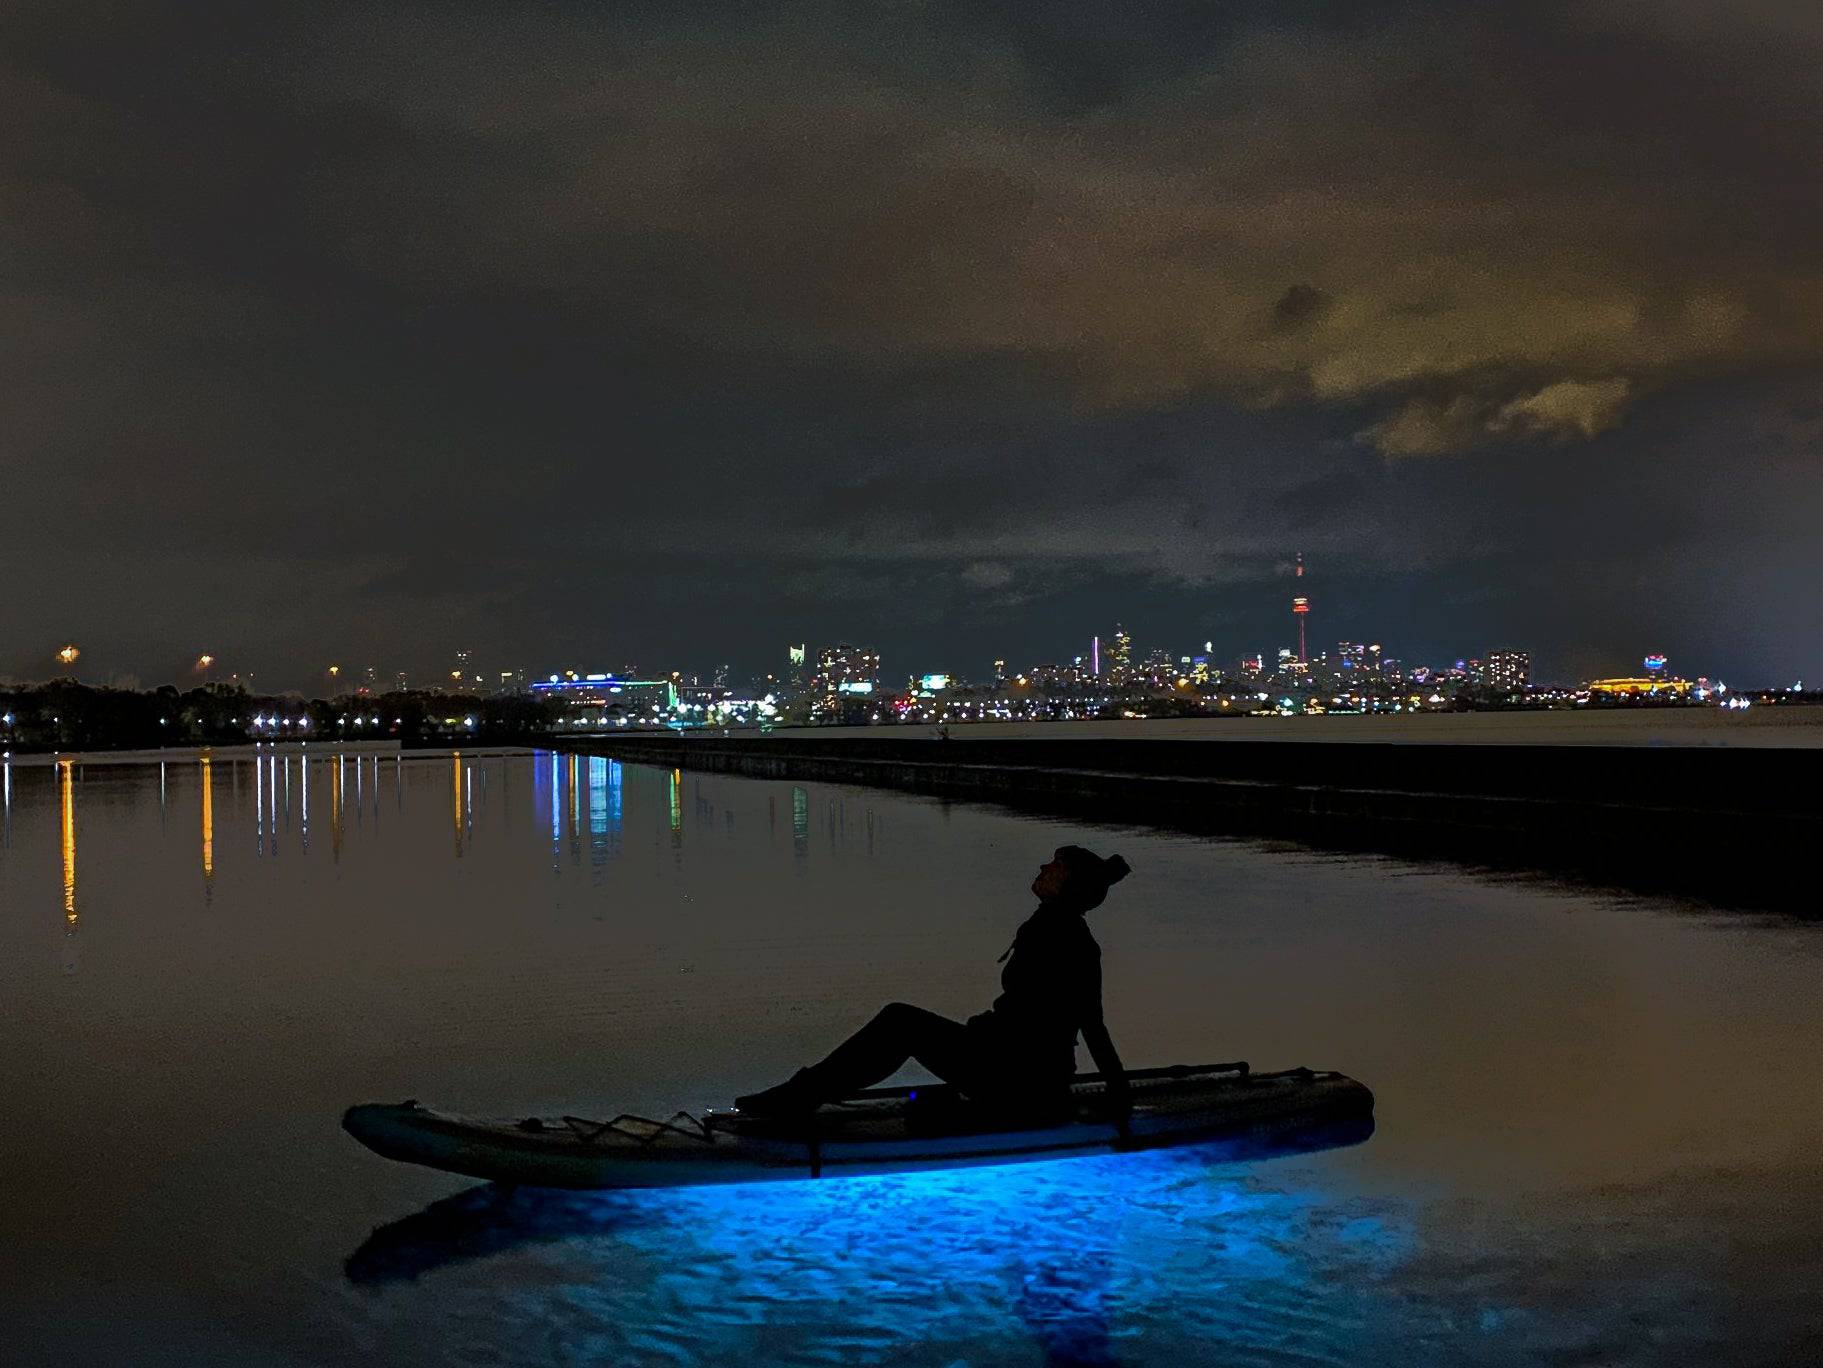 Star gazing from your SUP and enjoying a beautiful glow below the paddle board. Aurora Explorer paddleboard lights are easy to setup